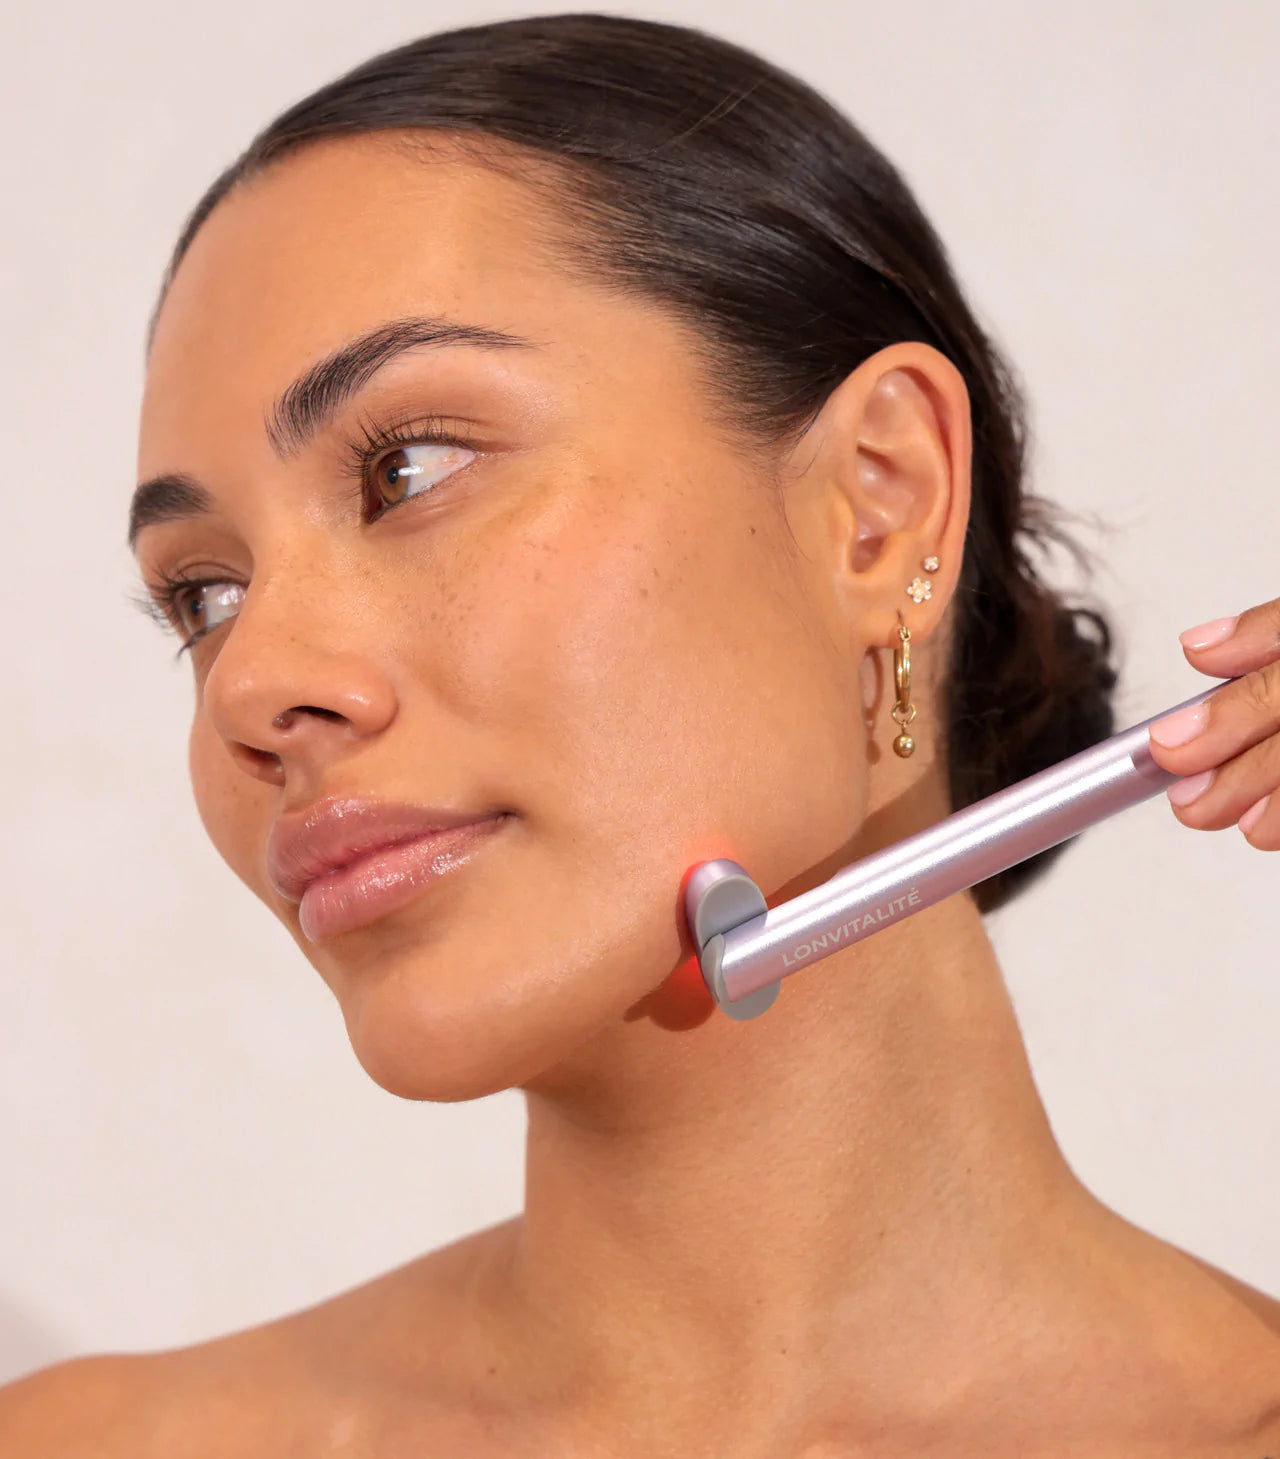 Red & Blue Light Facial Wand: How to Incorporate it into Your Skincare Routine